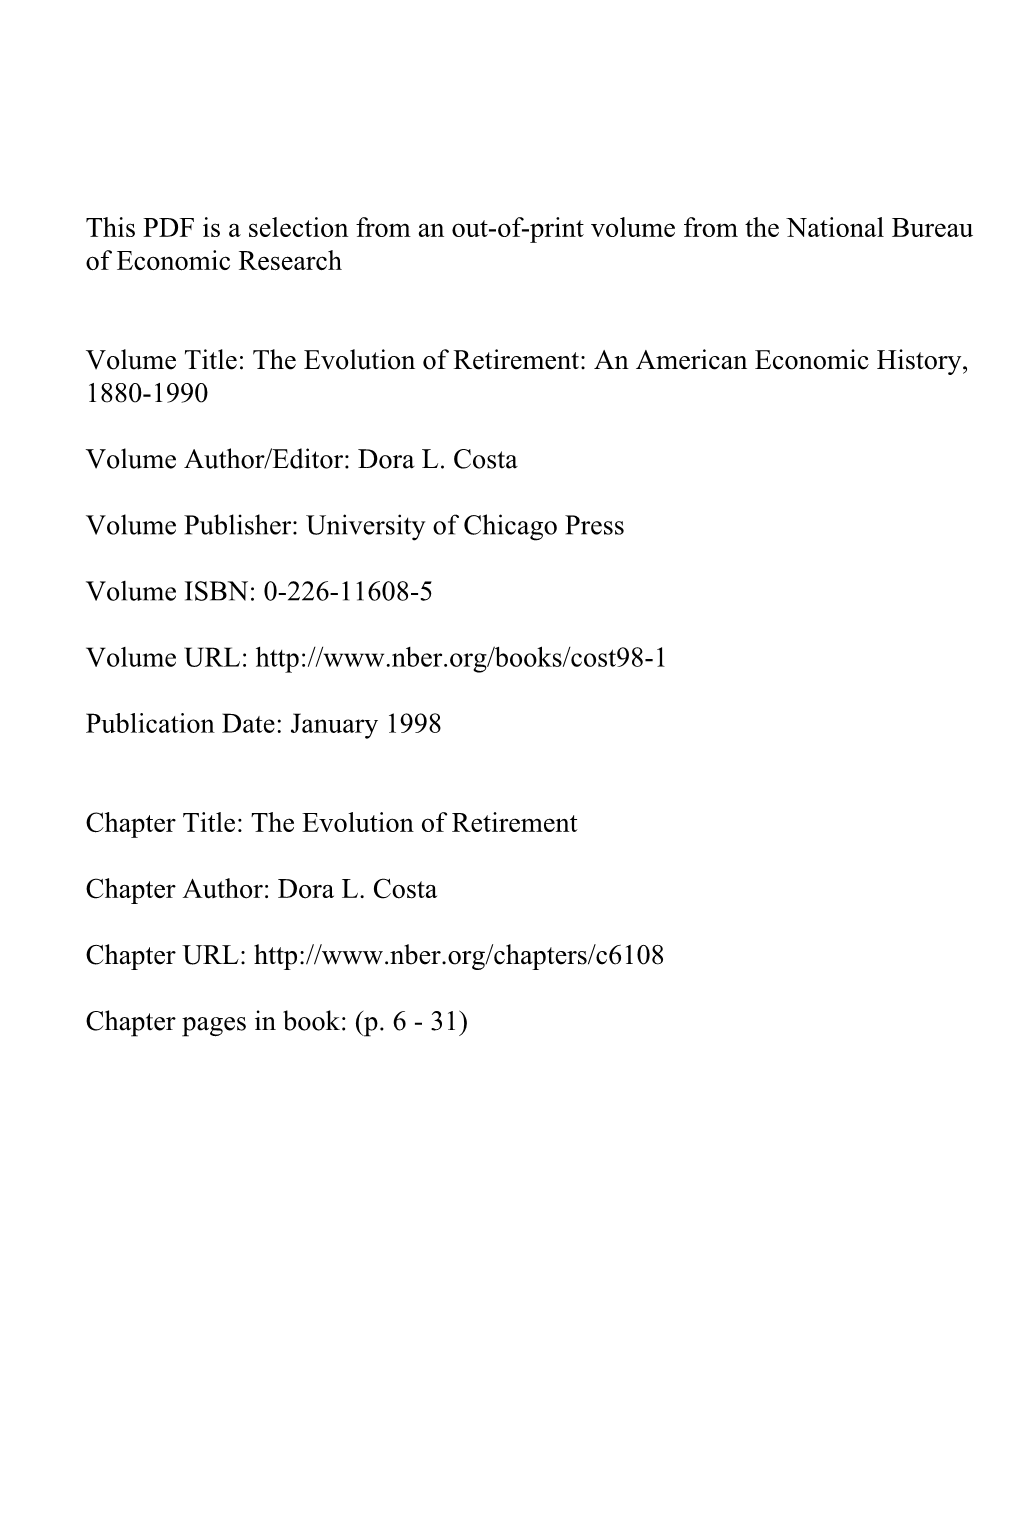 The Evolution of Retirement: an American Economic History, 1880-1990